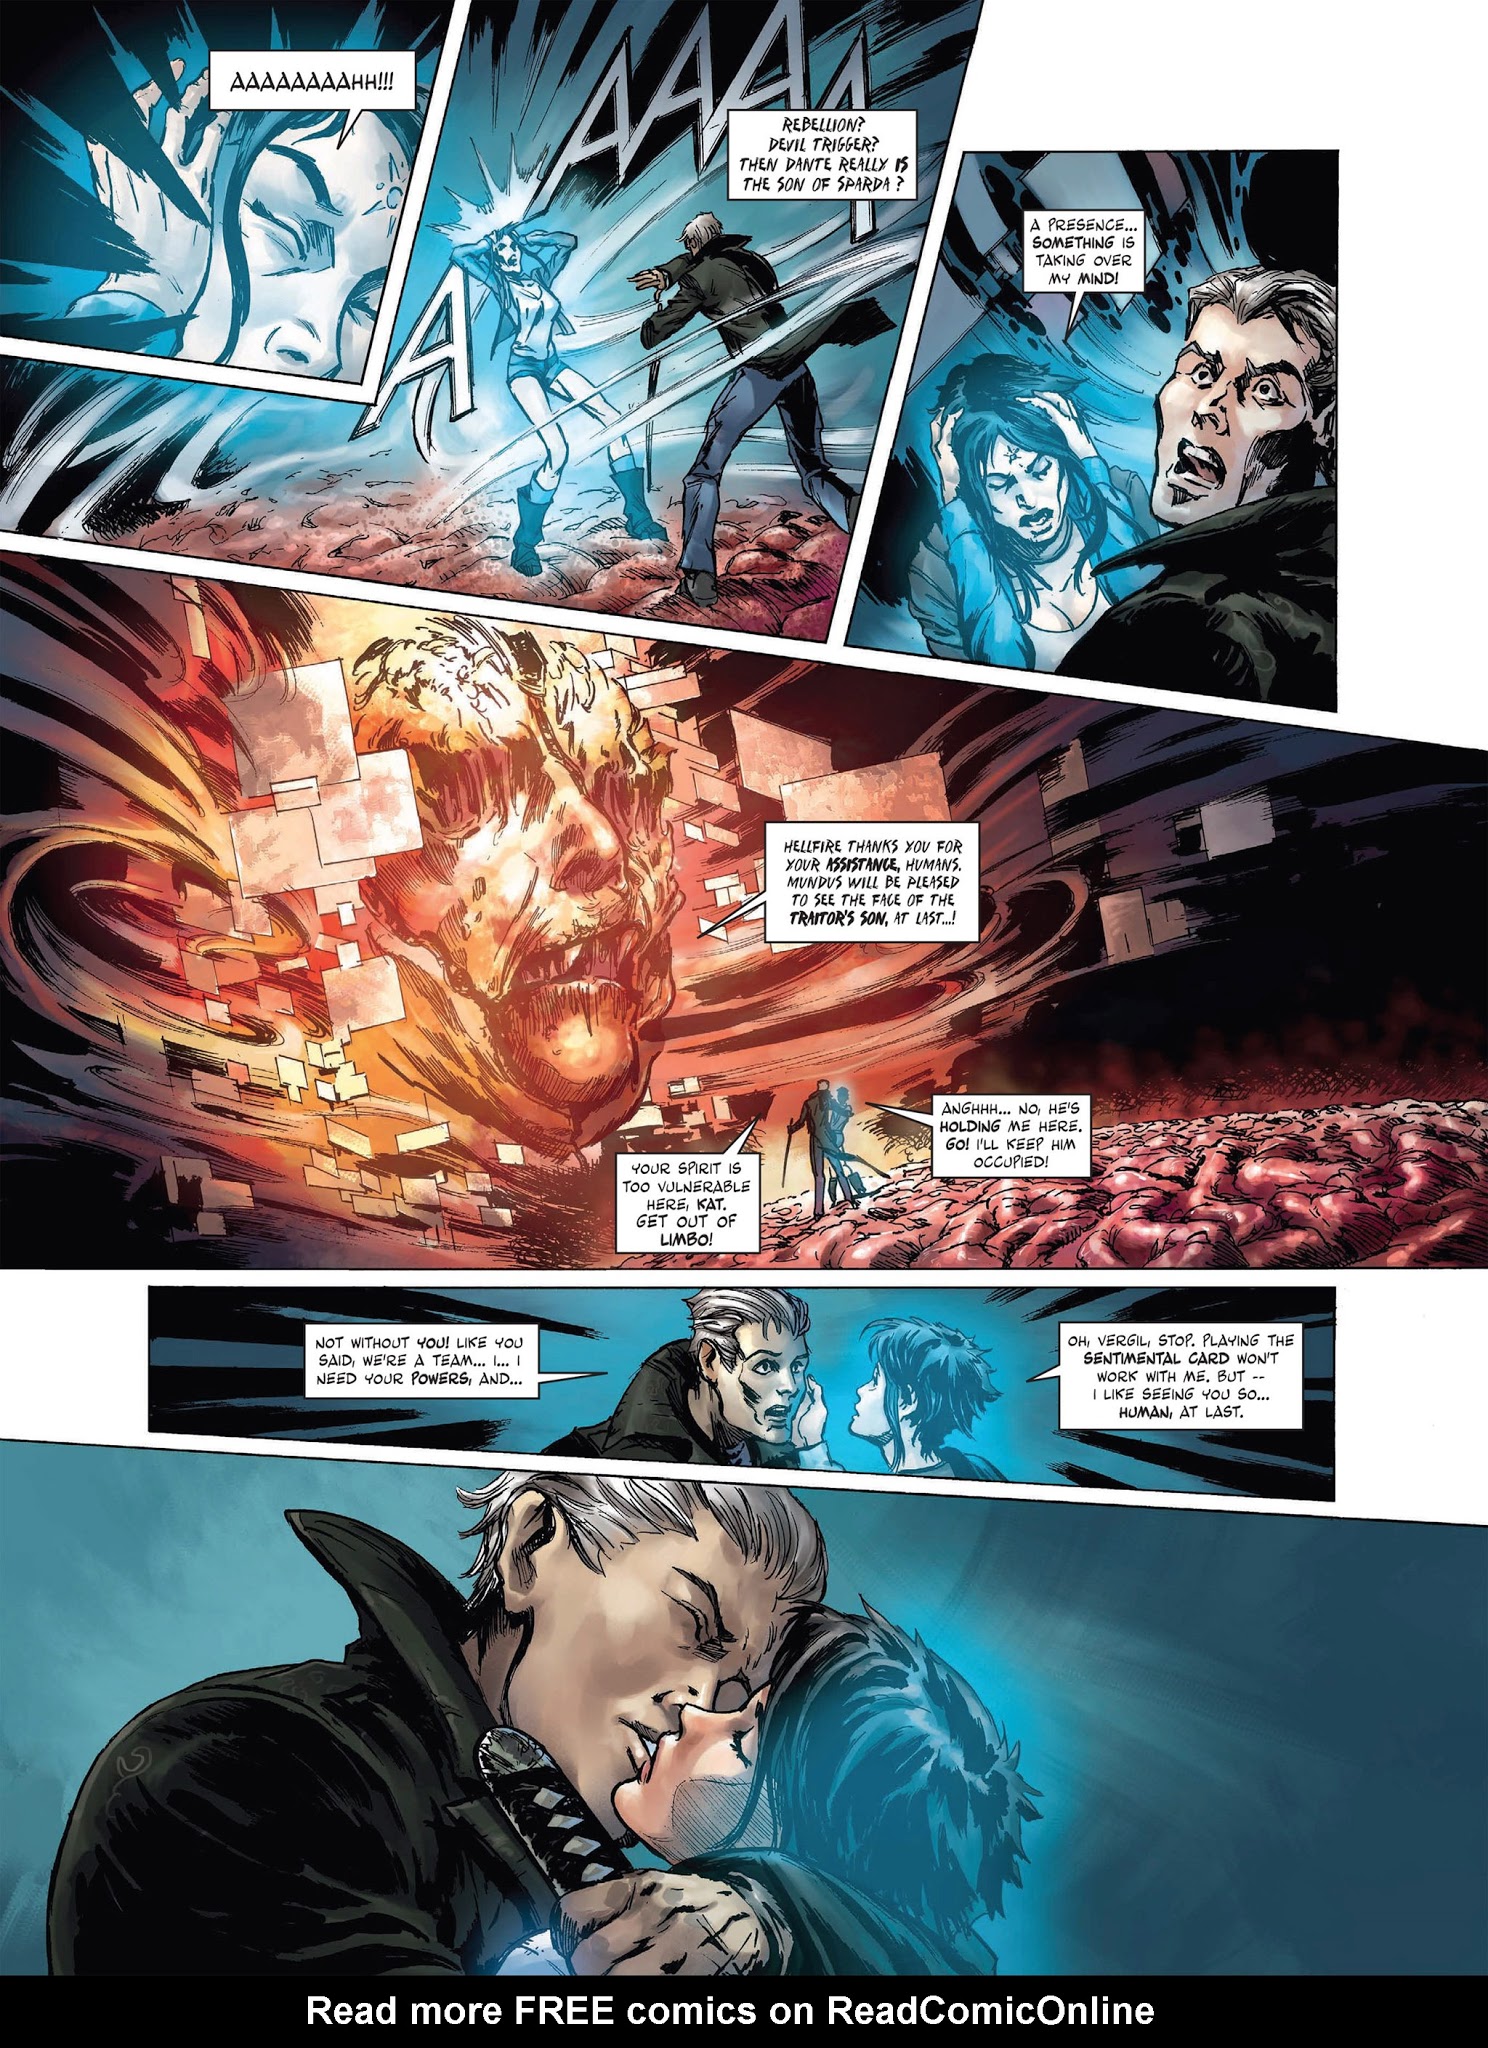 dmc devil may cry the chronicles of vergil #2